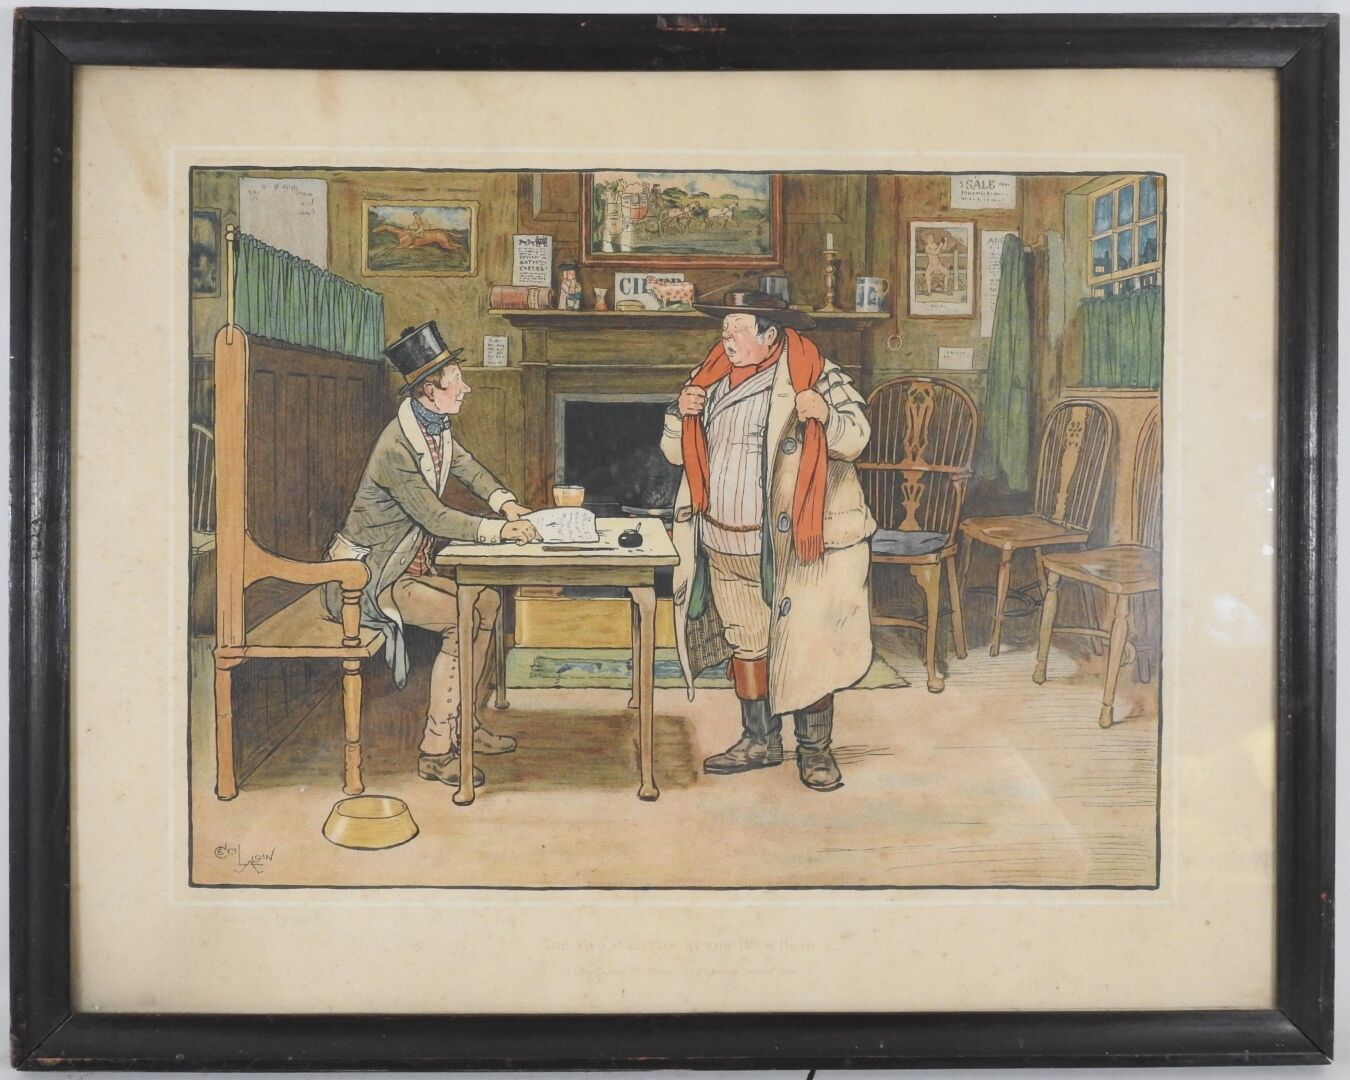 Null Cécil ALDIN (1870-1935) after.

The two Wellers at the Boar.

Printed by La&hellip;